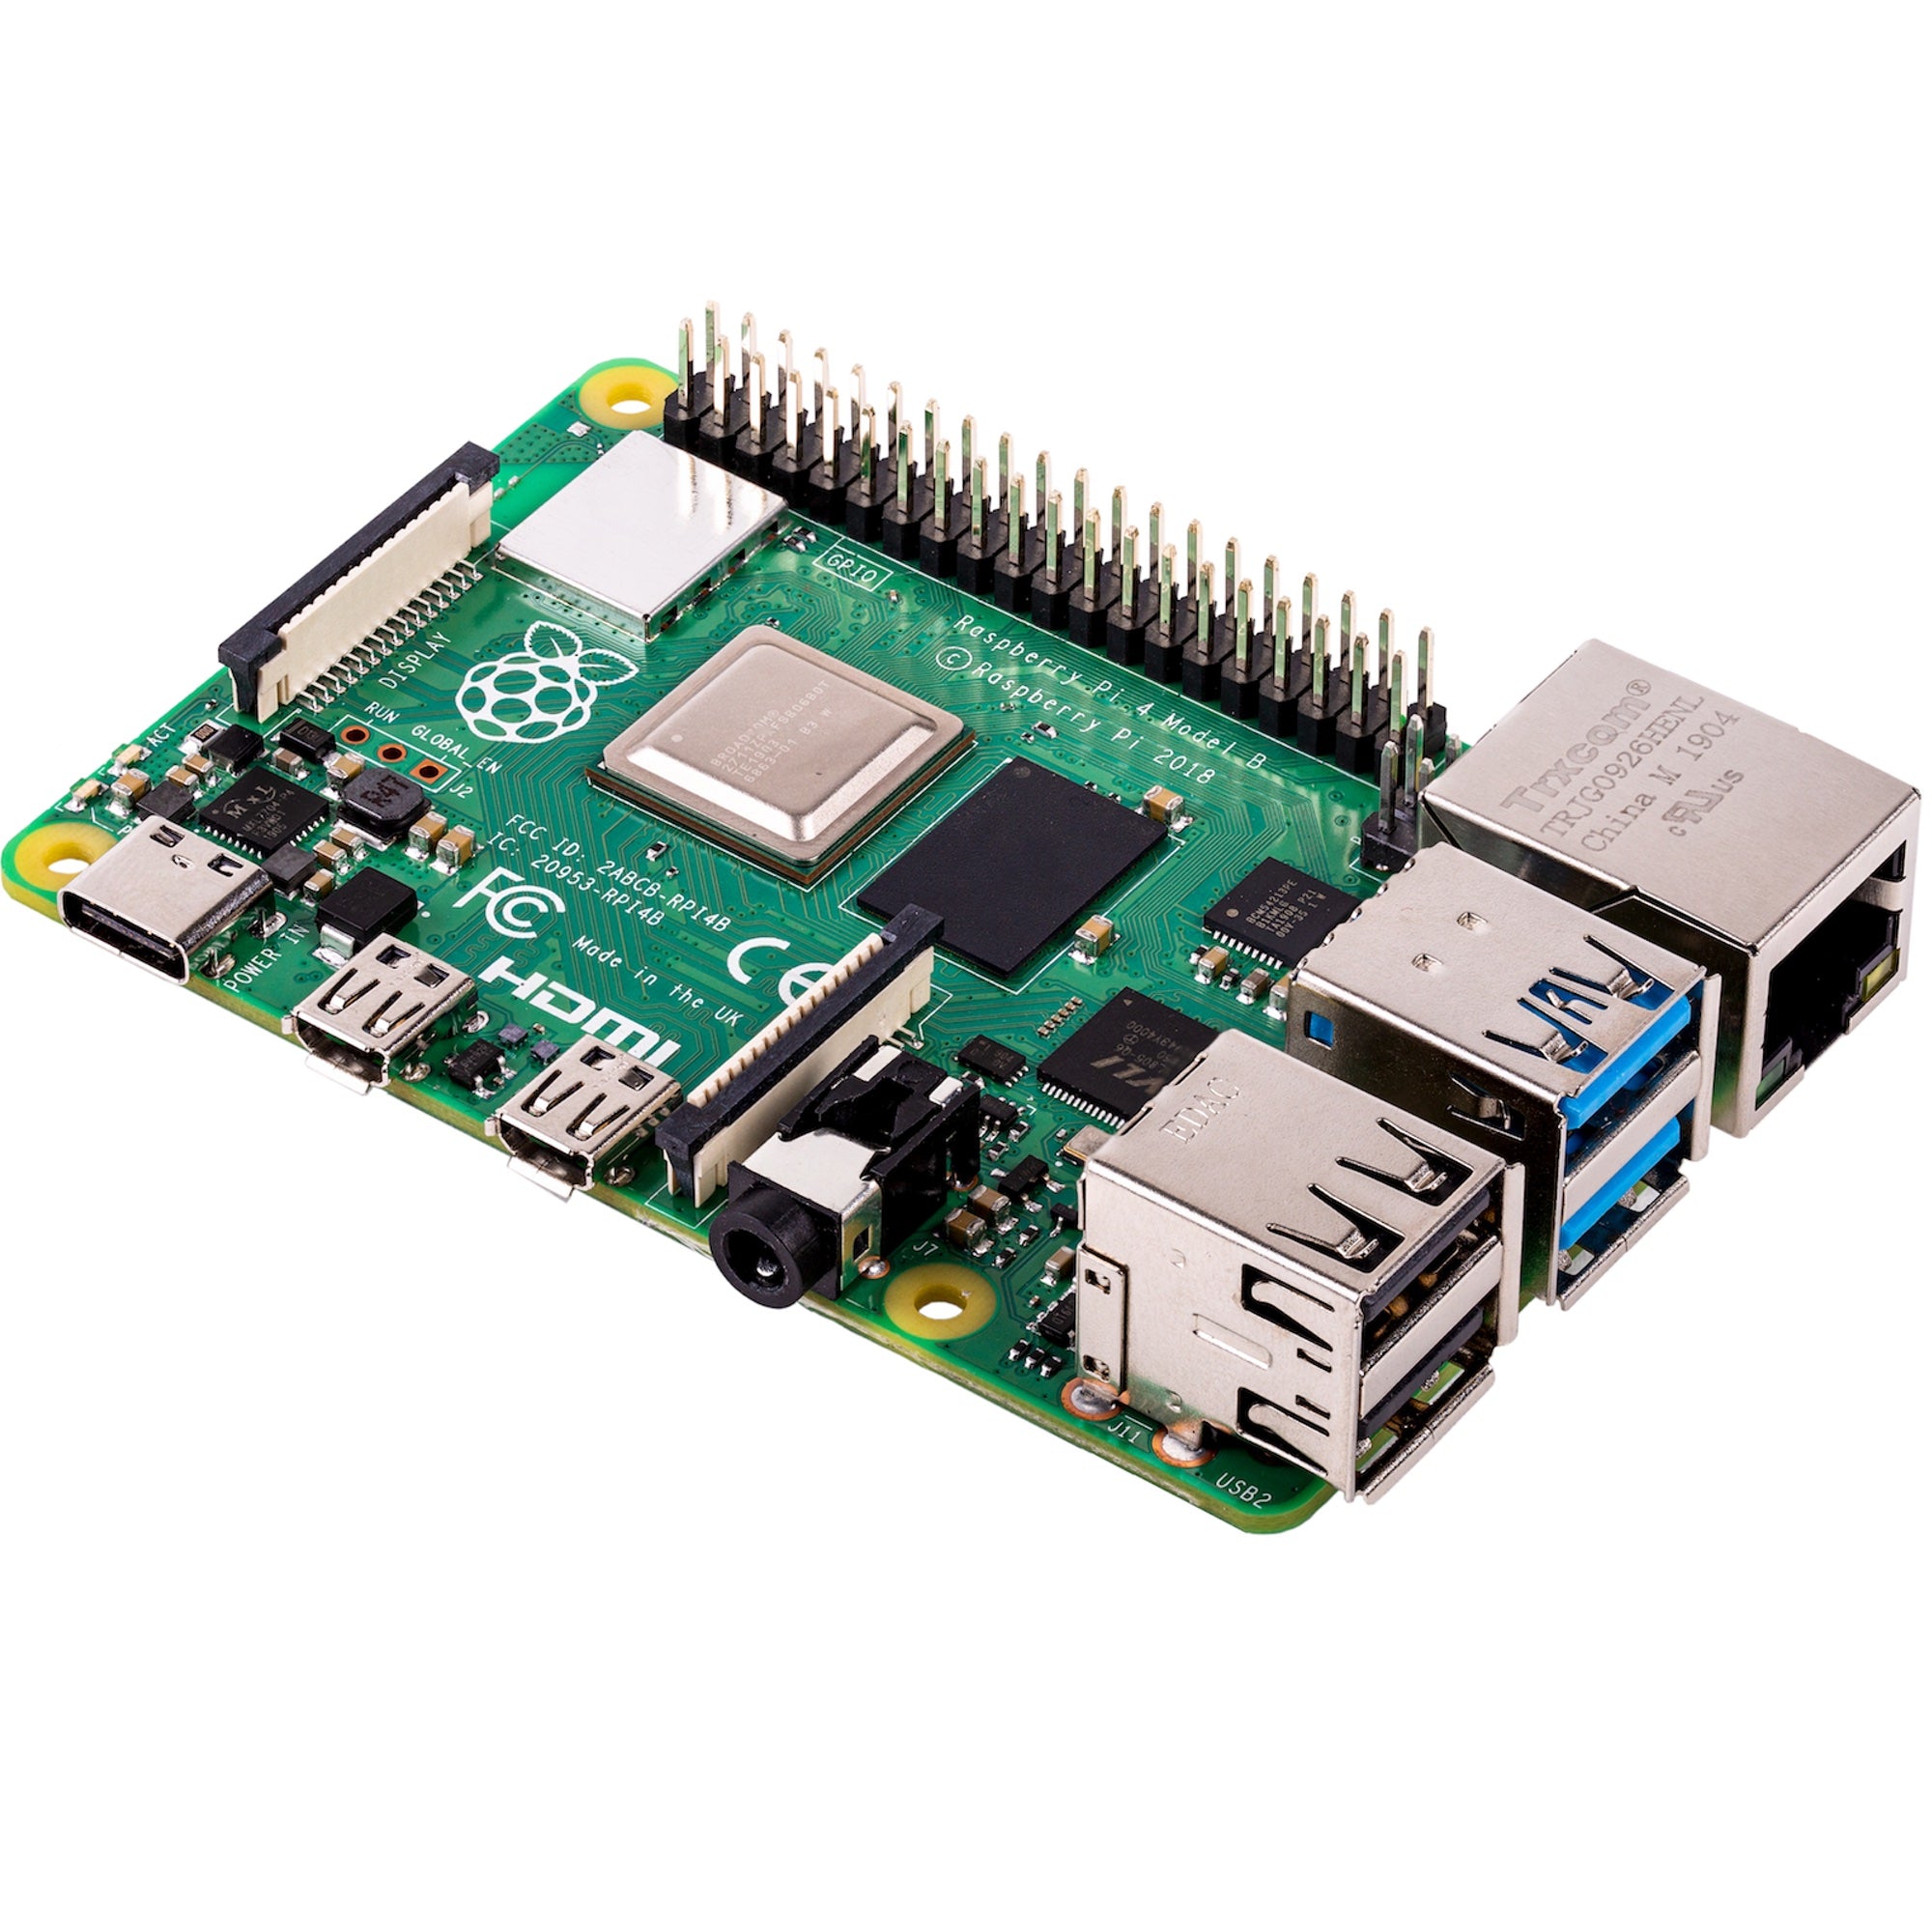 Raspberry Pi 400 All-in-One Quad-Core 64 Bit 4GB Ram Dual Band WiFi  Bluetooth 5.0 BLE Dual 4K Output Complete Personal Computer Kit Built Into  A